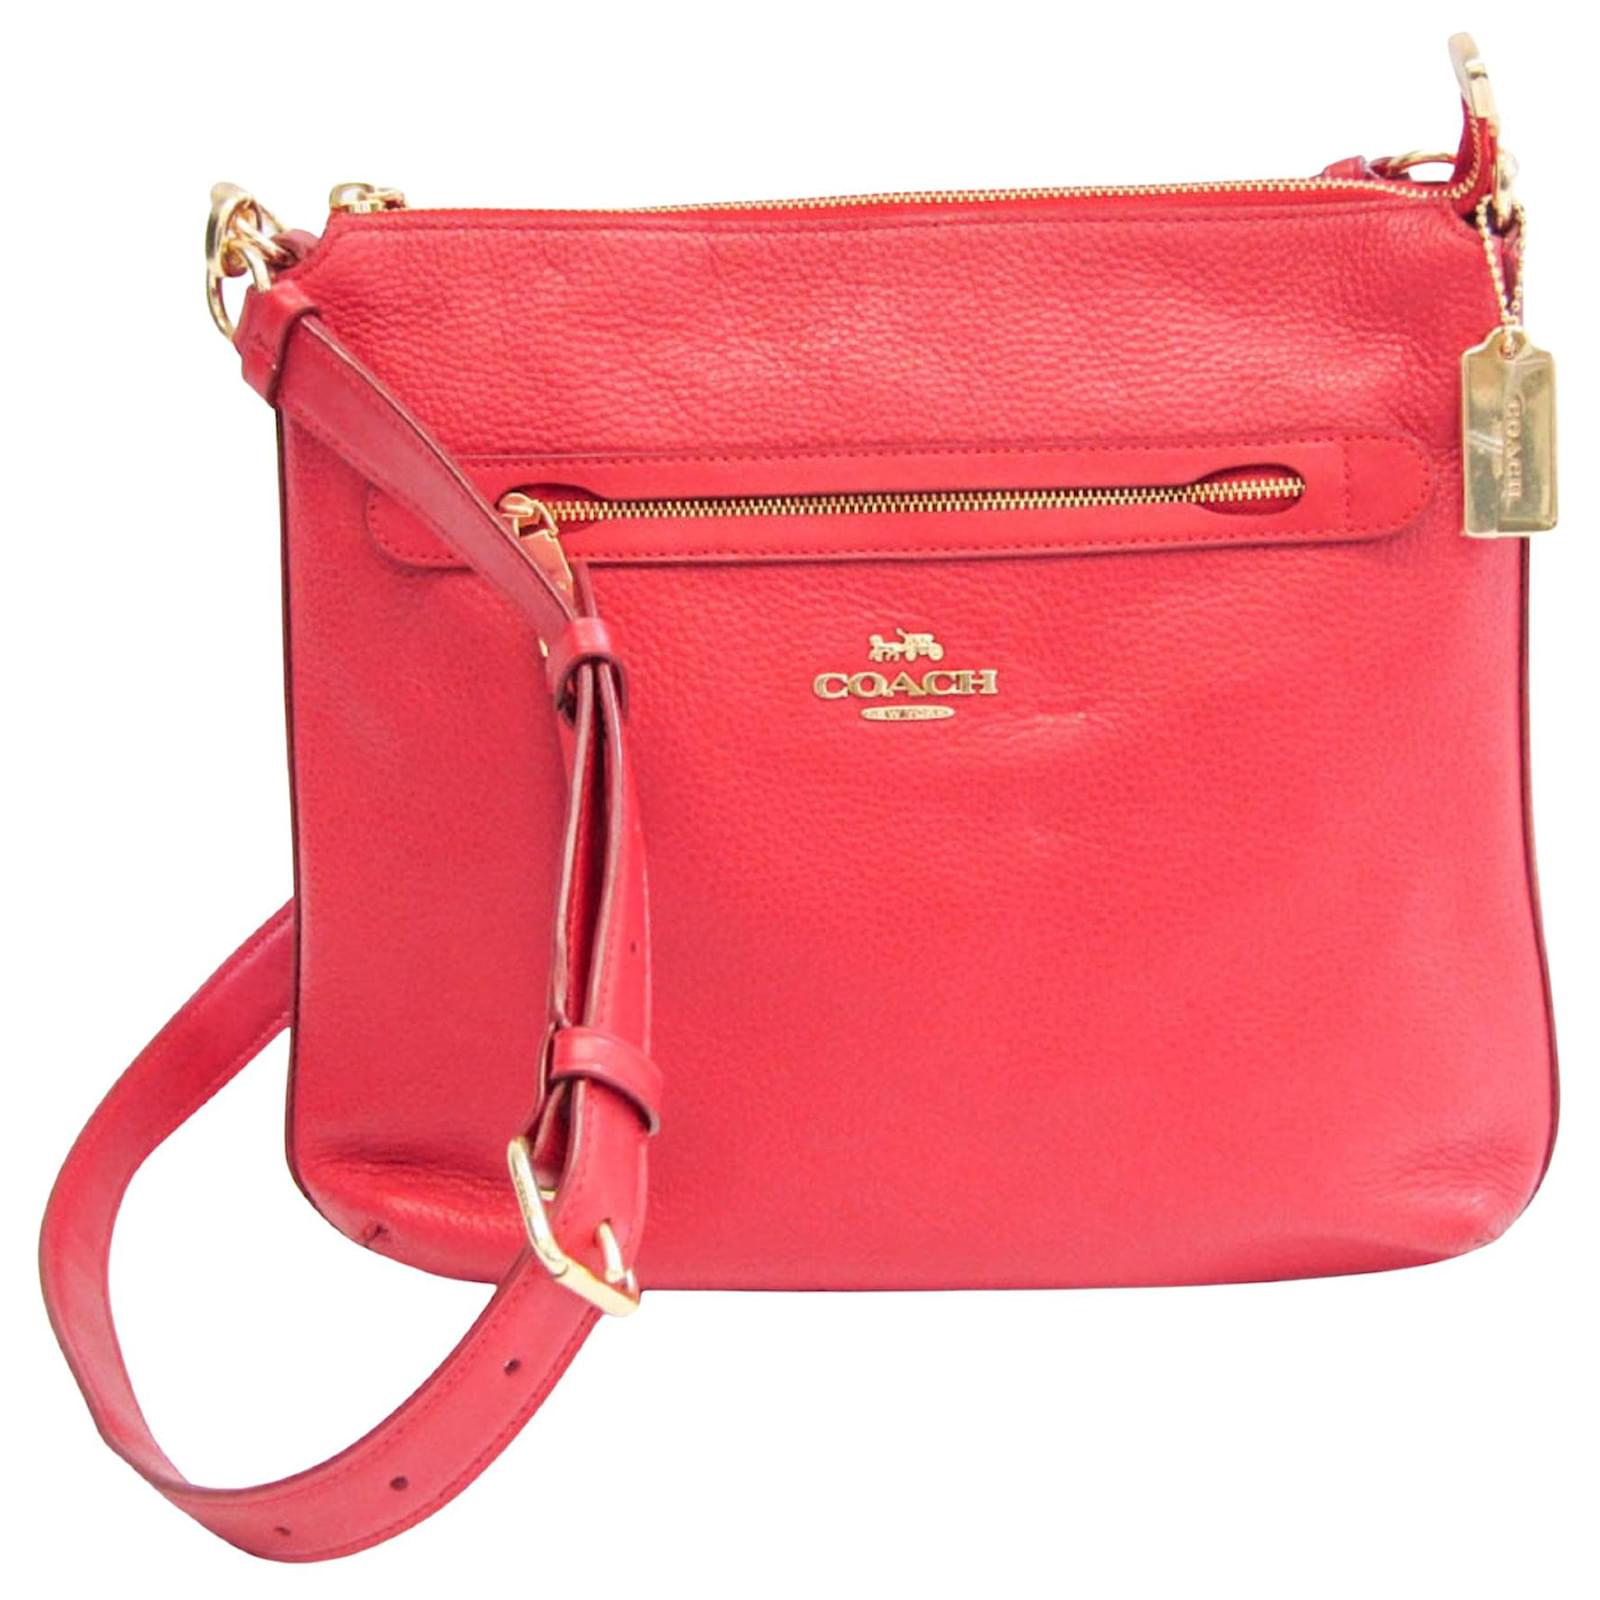 Vintage Red Leather Coach Purse | Urban Outfitters